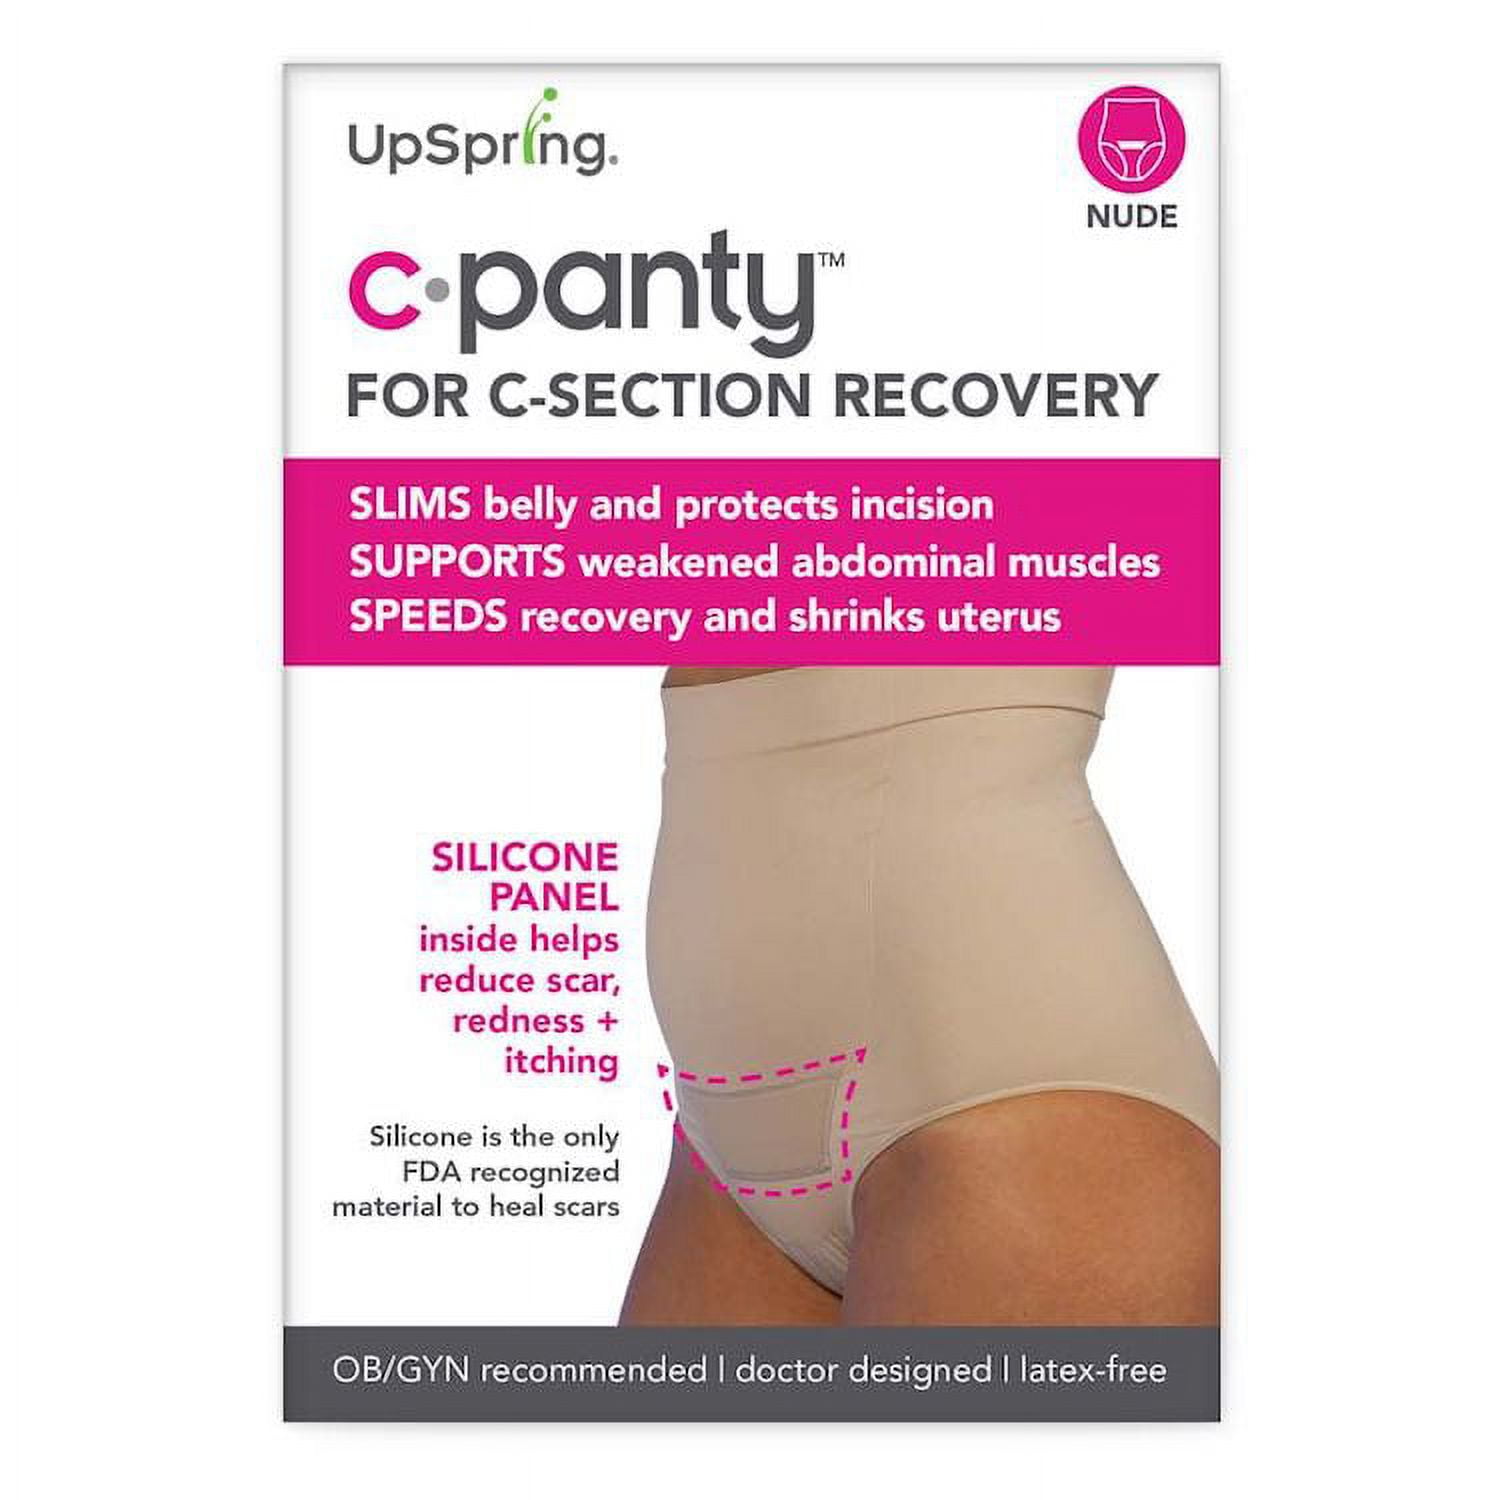 Just had a C-section? Try our C-Panty with comfortable, upward